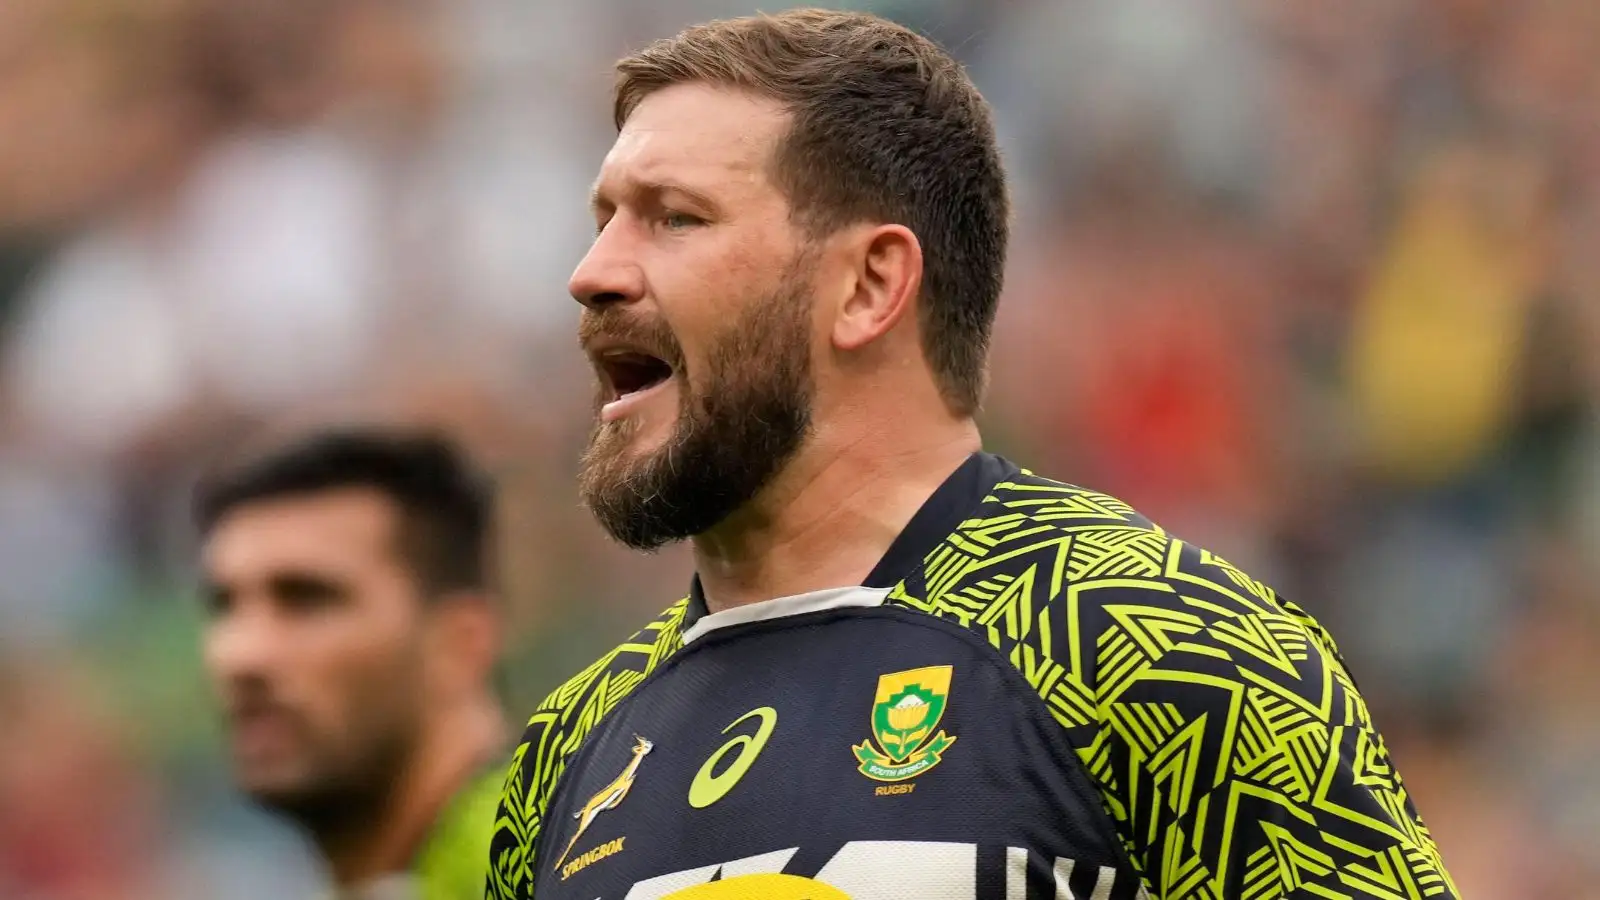 South Africa back Frans Steyn could miss the Rugby World Cup for the Springboks after injury